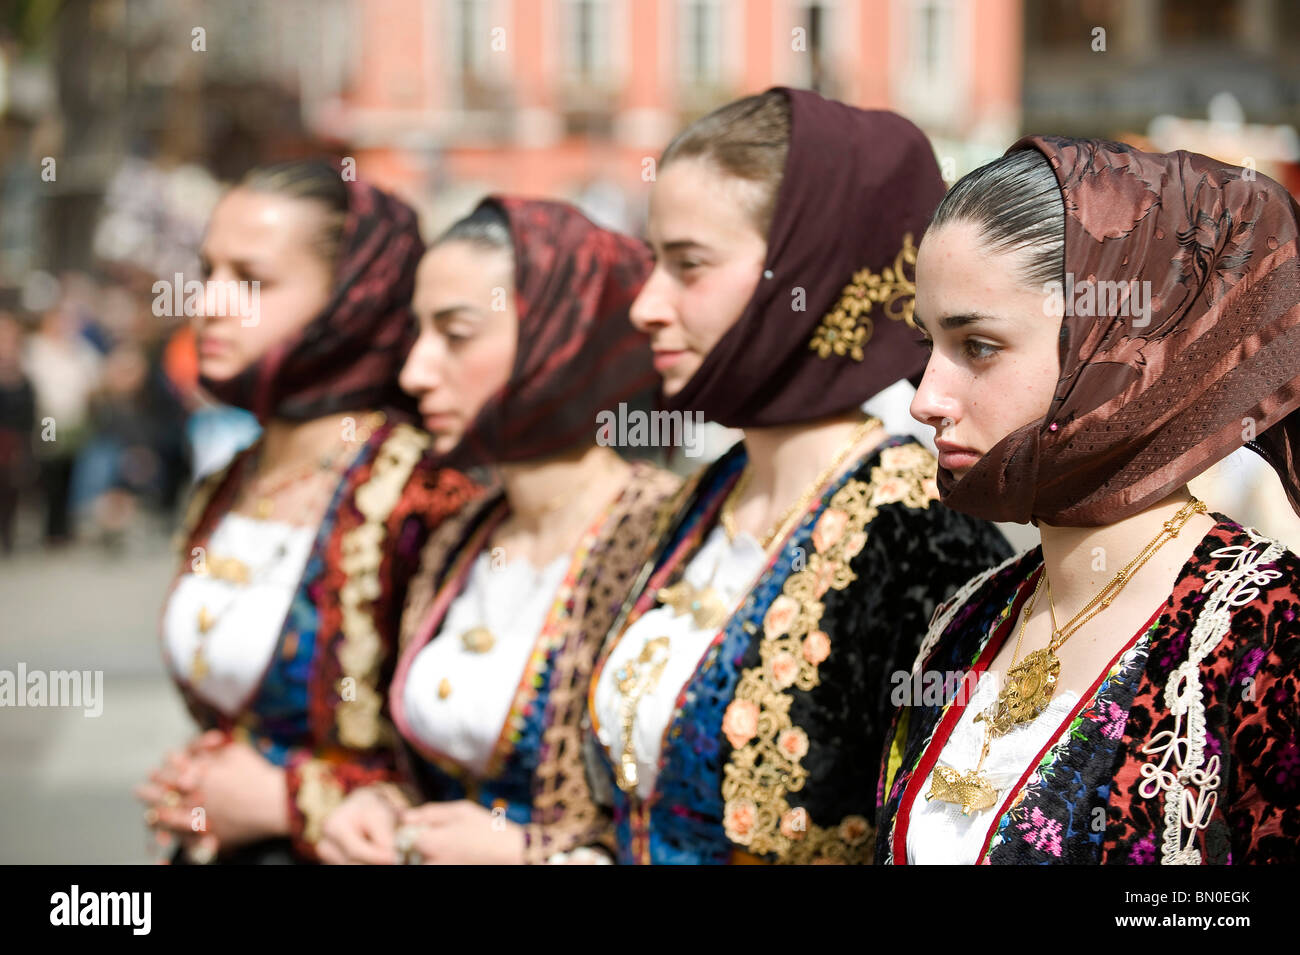 women-in-traditional-dress-cagliari-santefisio-traditional-event-the-BN0EGK.jpg